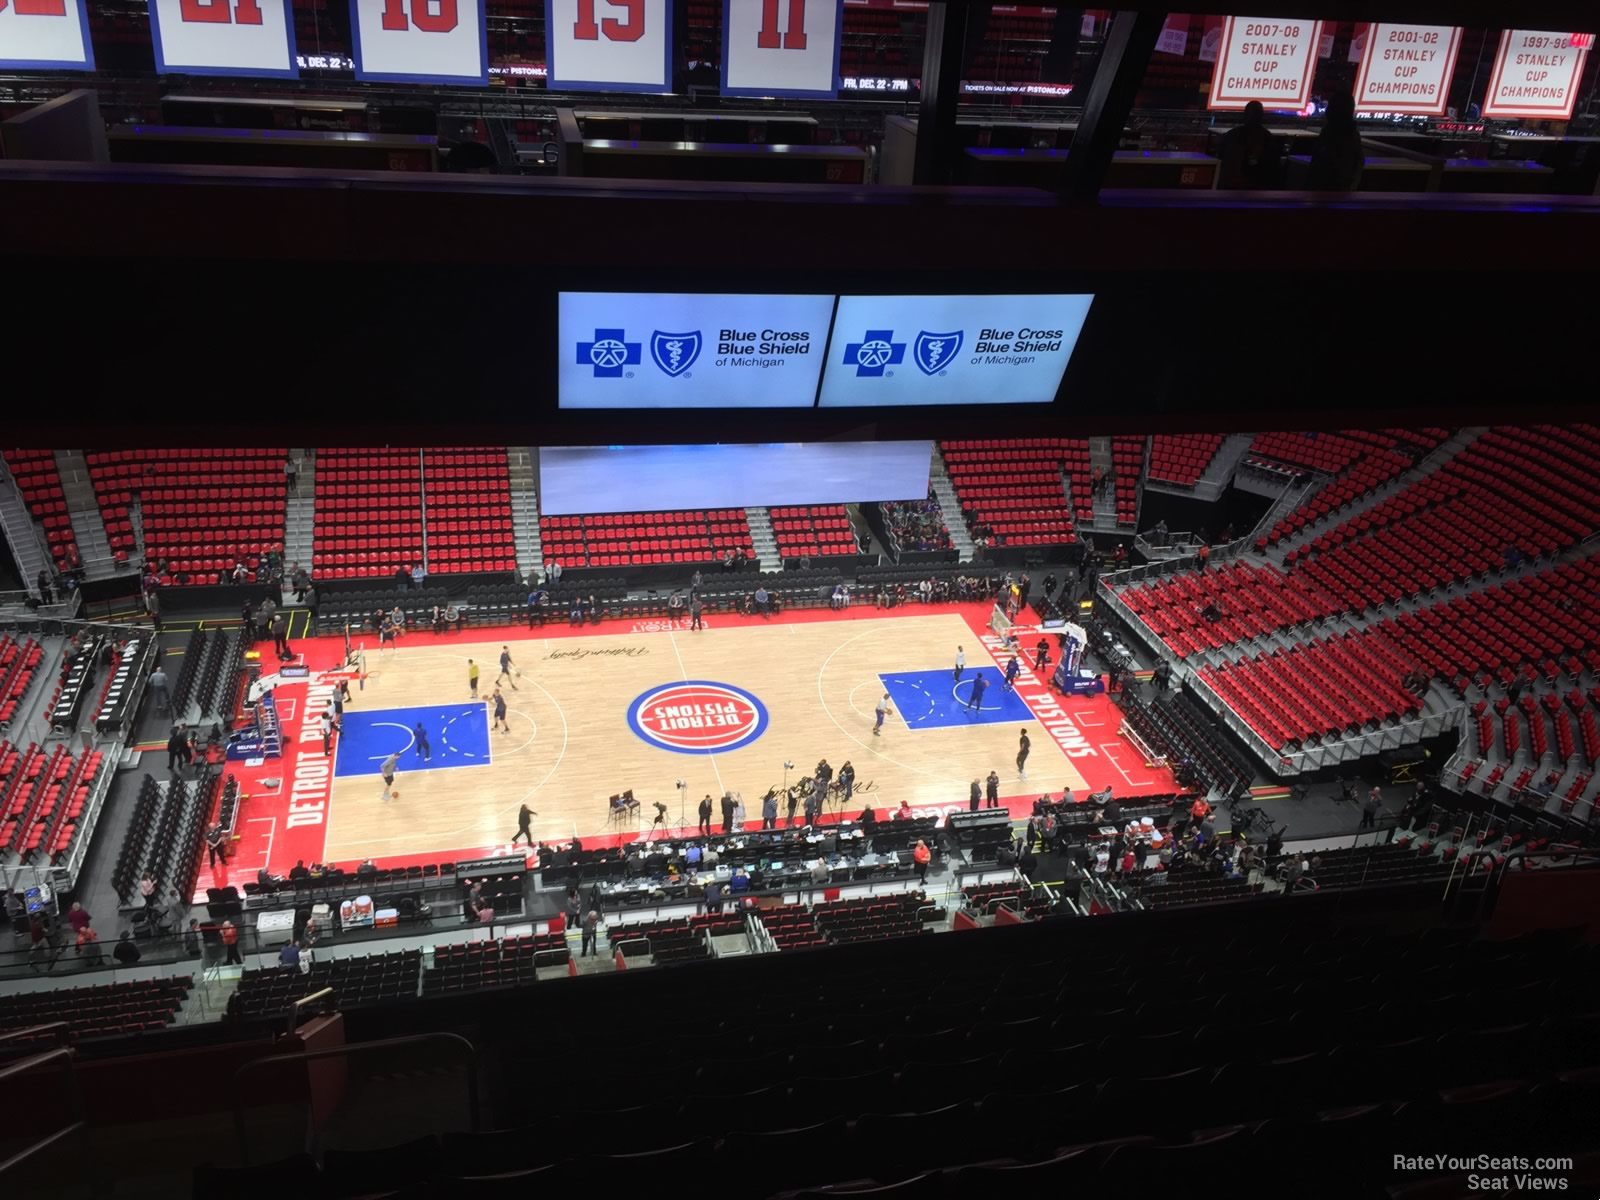 section 227, row 12 seat view  for basketball - little caesars arena